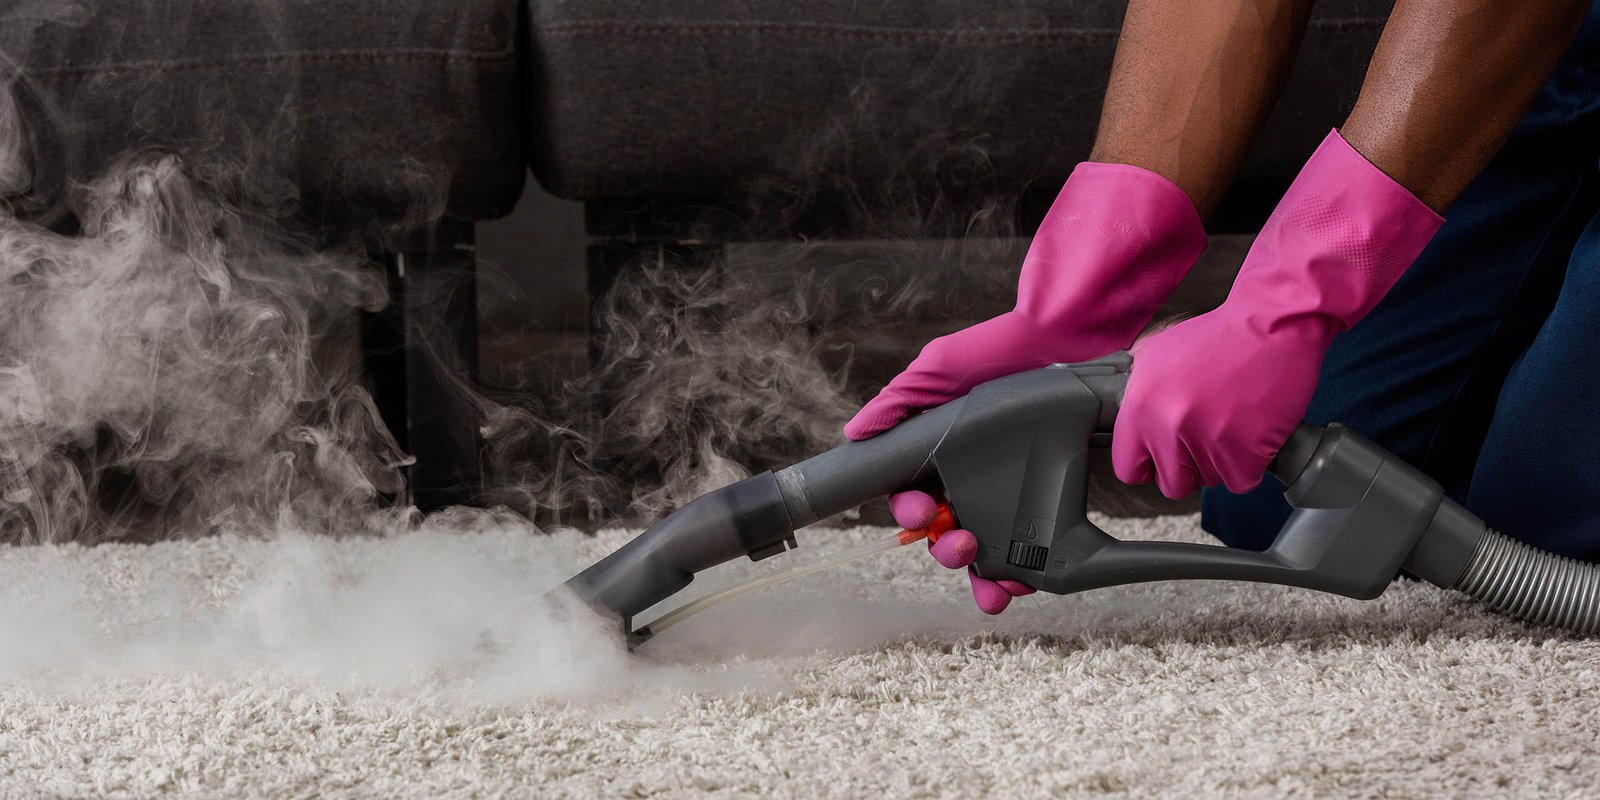 Can You Put Upholstery Cleaner In A Steam Cleaner?